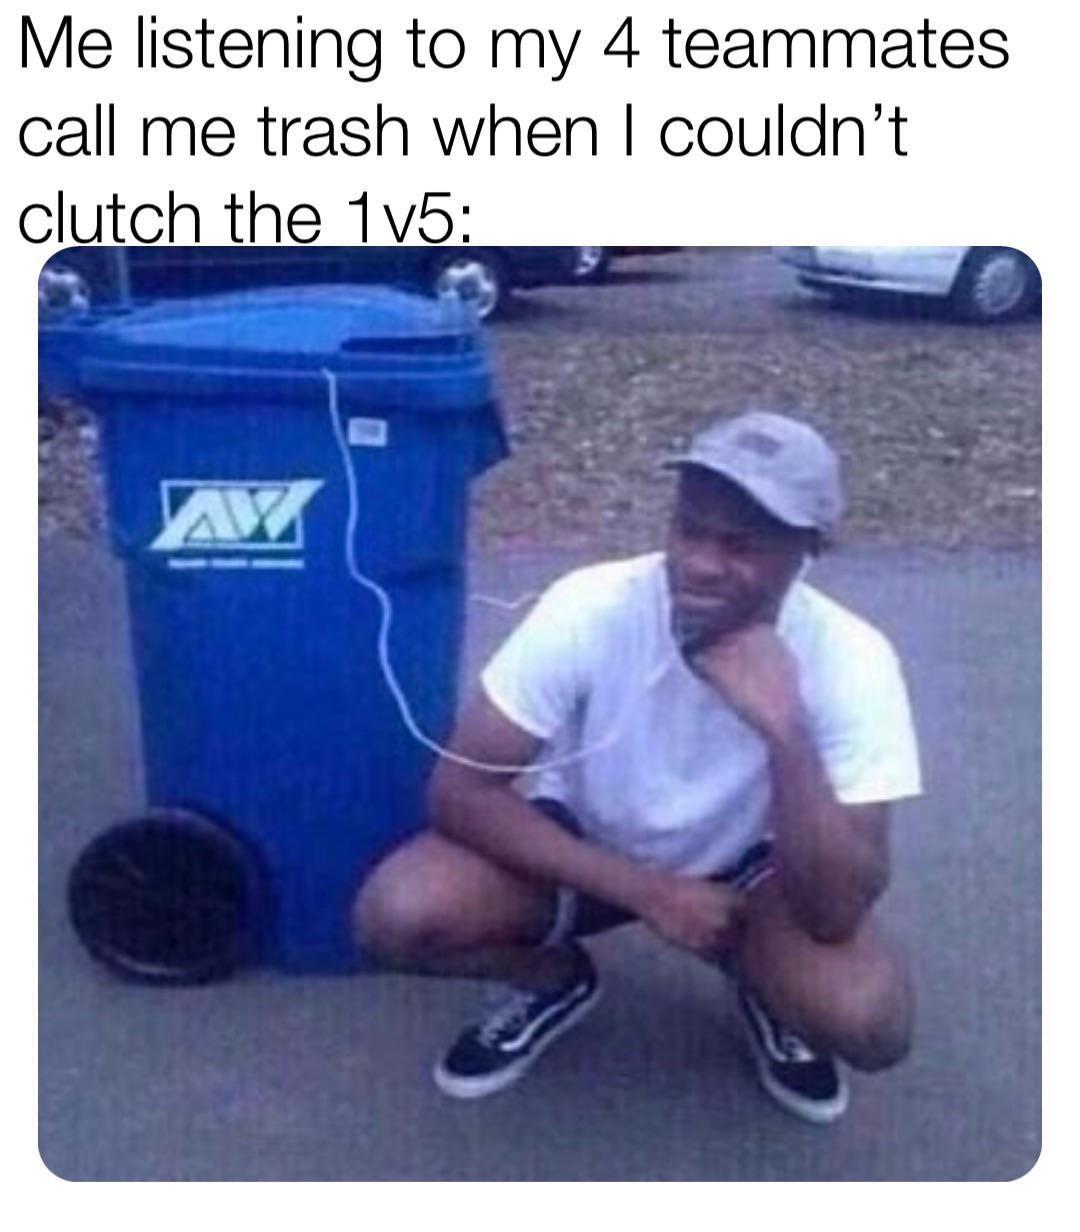 listening to trash meme template - Me listening to my 4 teammates call me trash when I couldn't clutch the 1v5